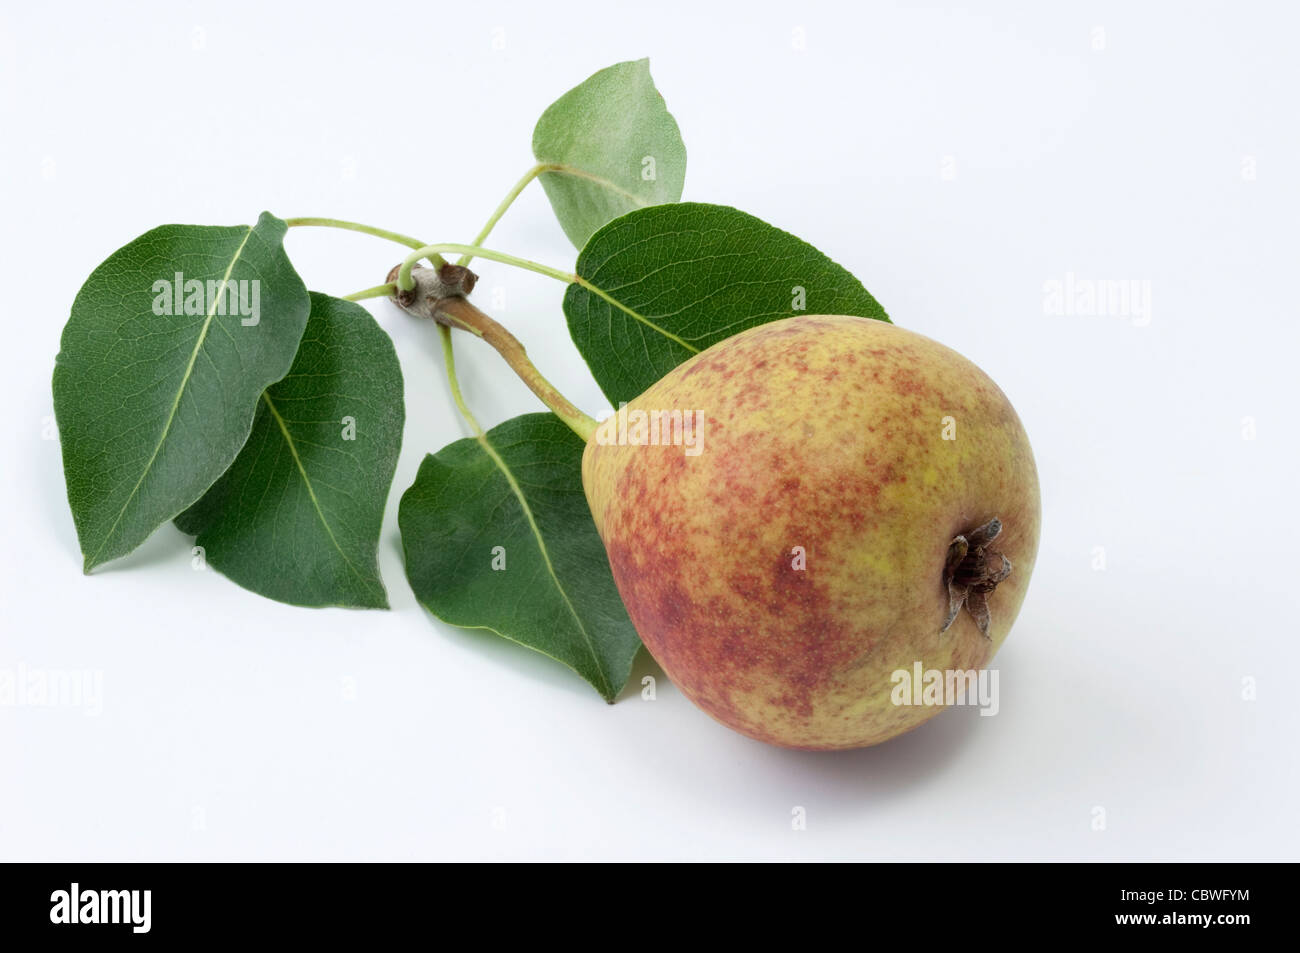 Common Pear, European Pear (Pyrus communis), variety: Blutbirne (blood pear), twig with ripe fruit and leaves Stock Photo